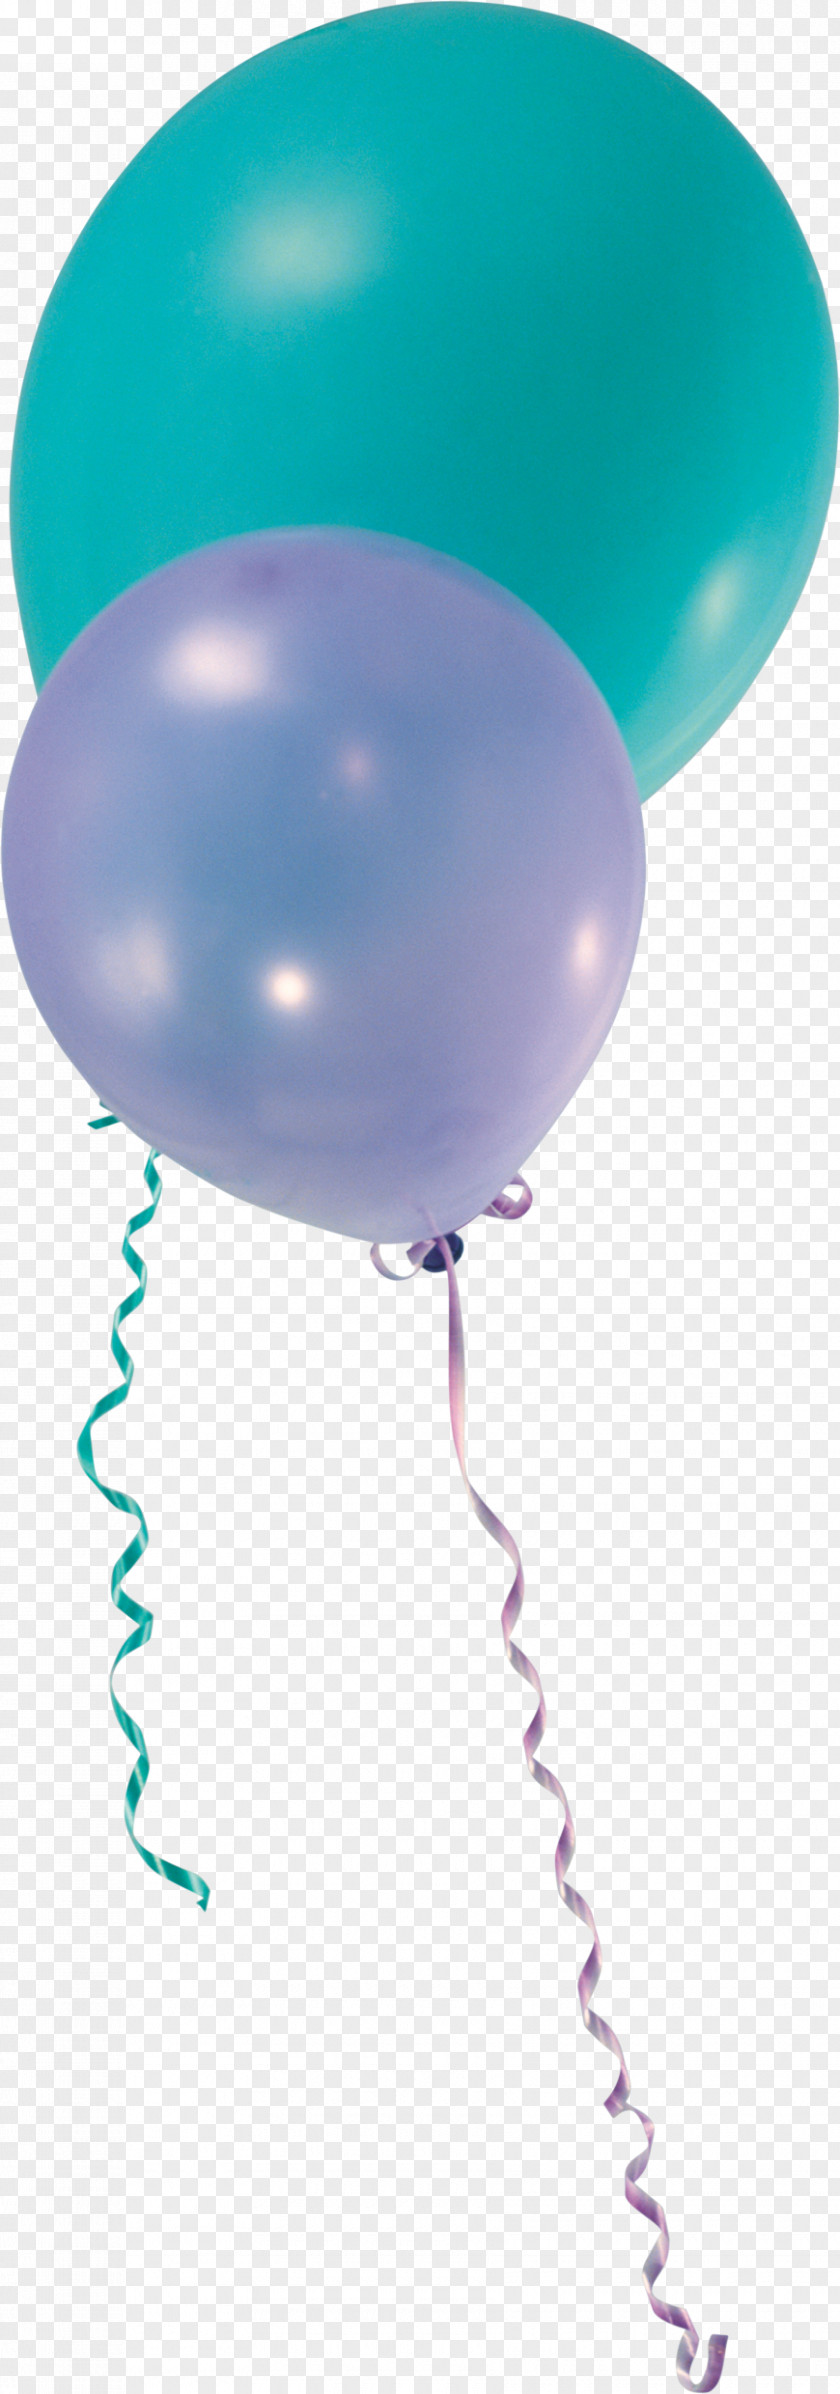 Balloon Toy Clip Art PNG